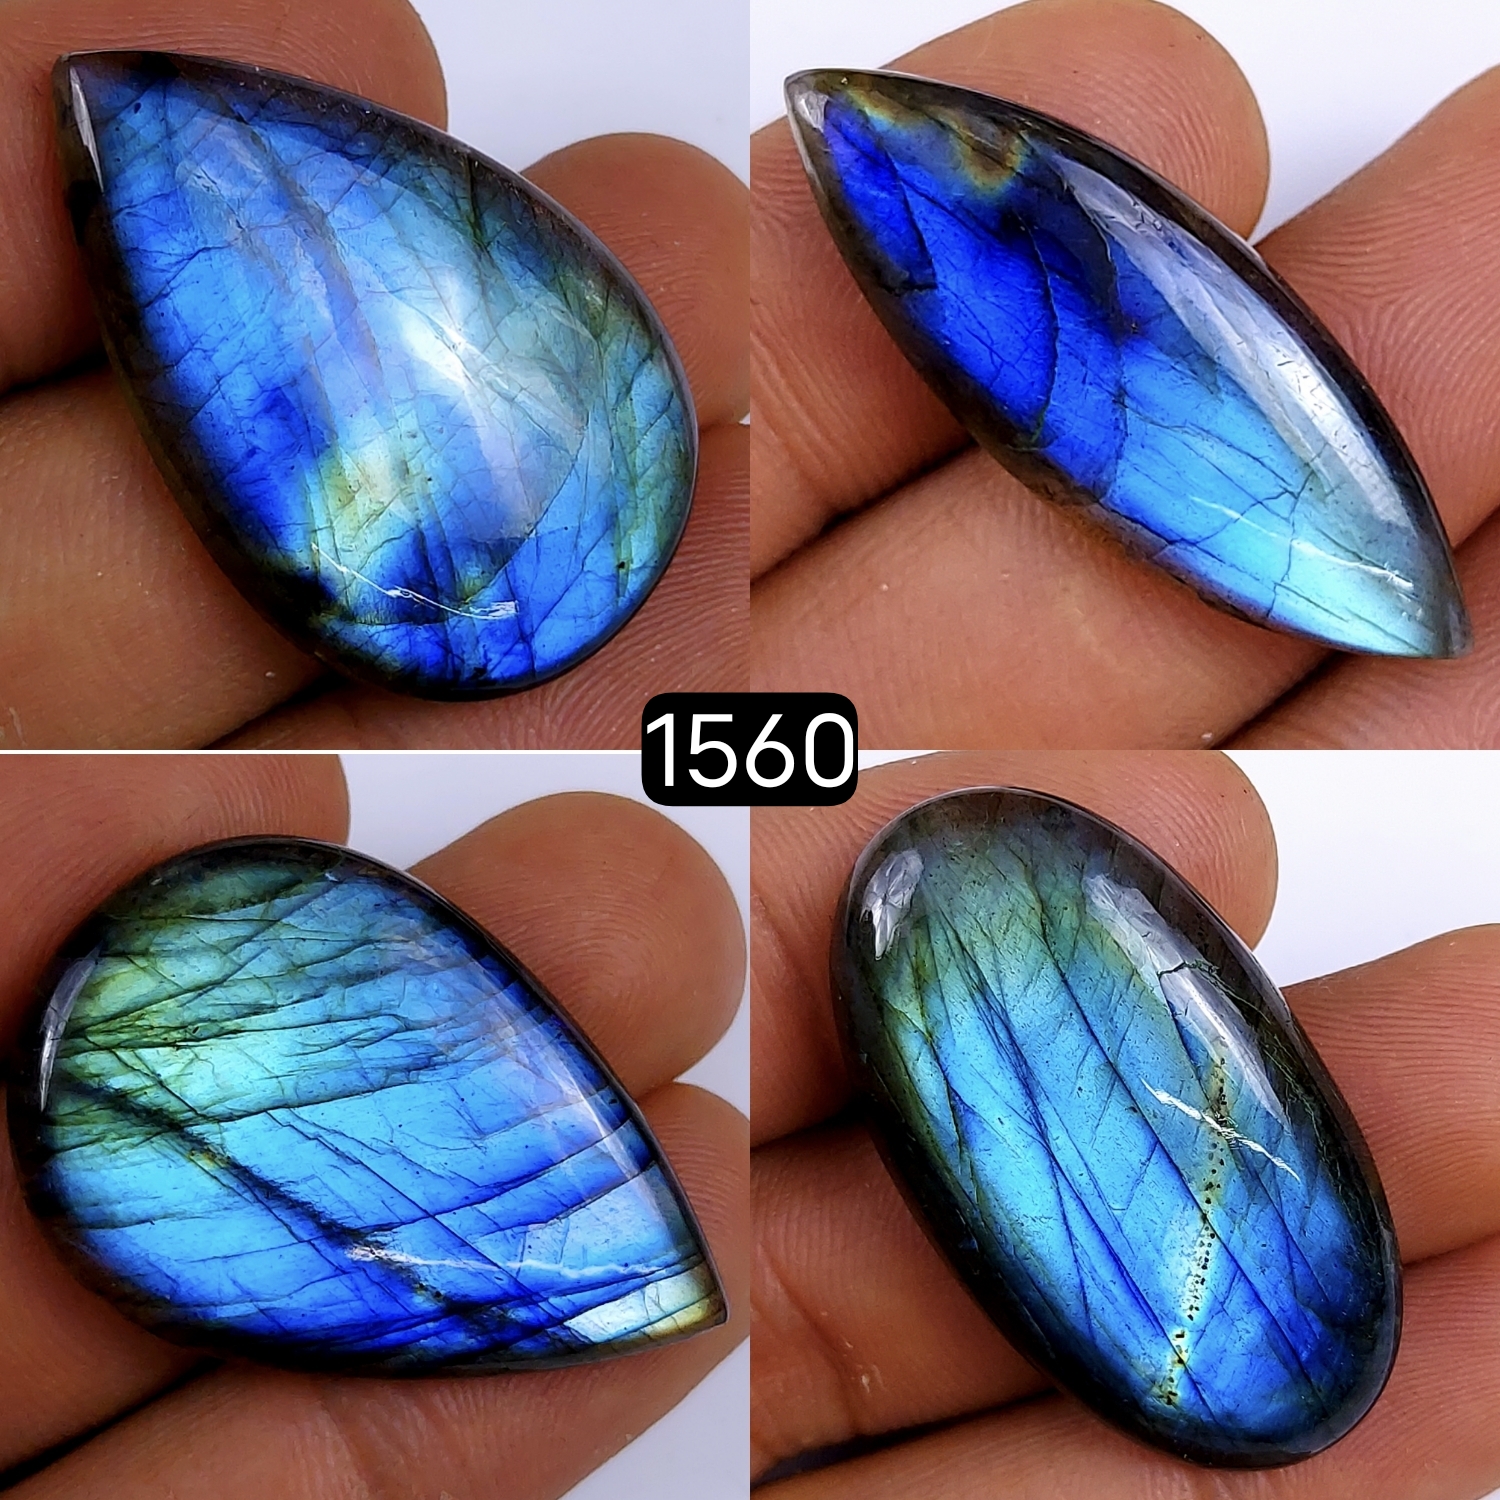 4Pcs Lot 149Cts Labradorite Cabochon Multifire Healing Crystal For Jewelry Supplies, Labradorite Necklace Handmade Wire Wrapped Gemstone Pendant 40X22 37X16mm#G-1560